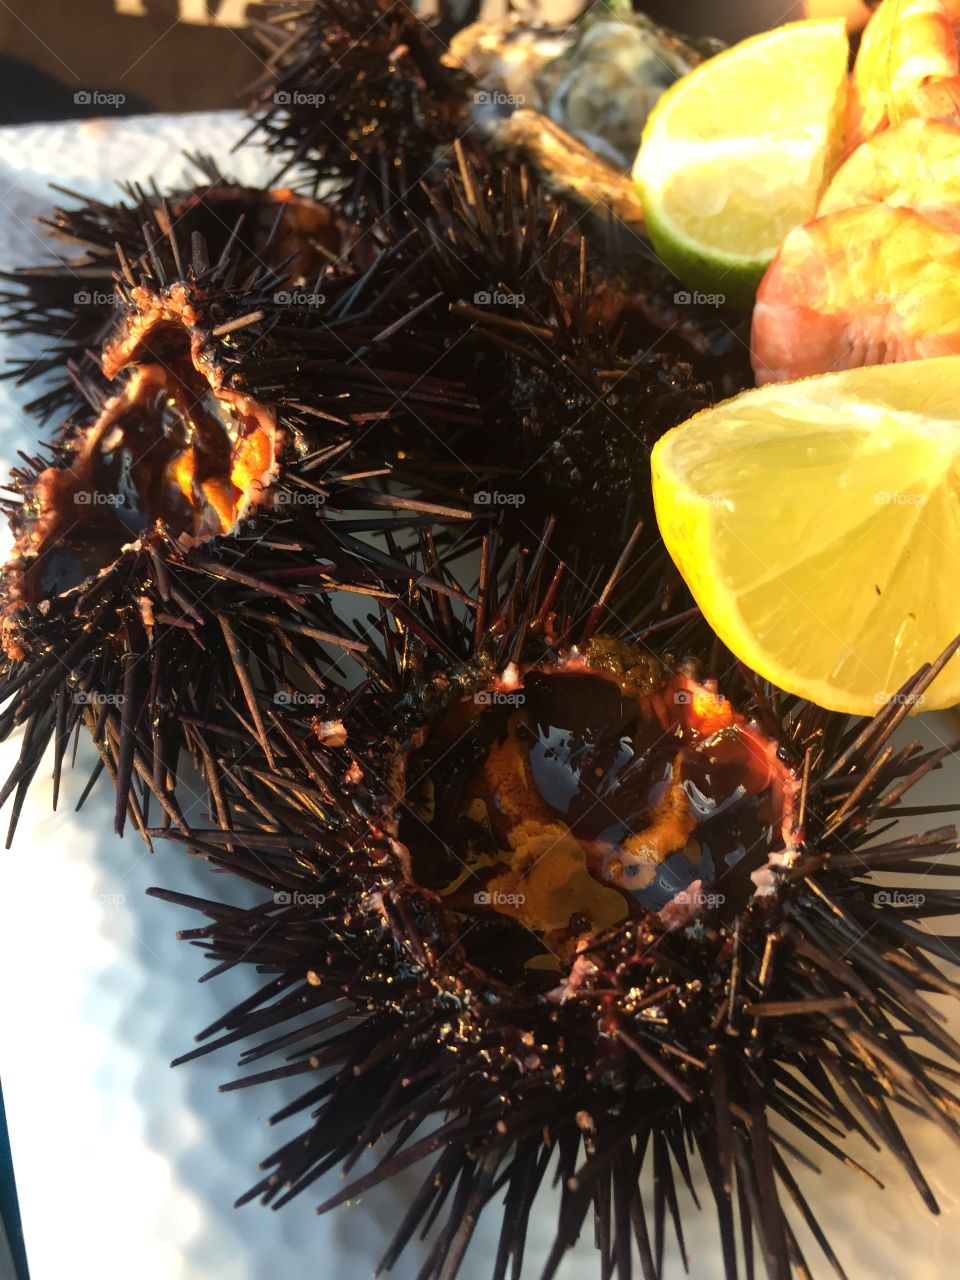 Sea urchins for dinner!